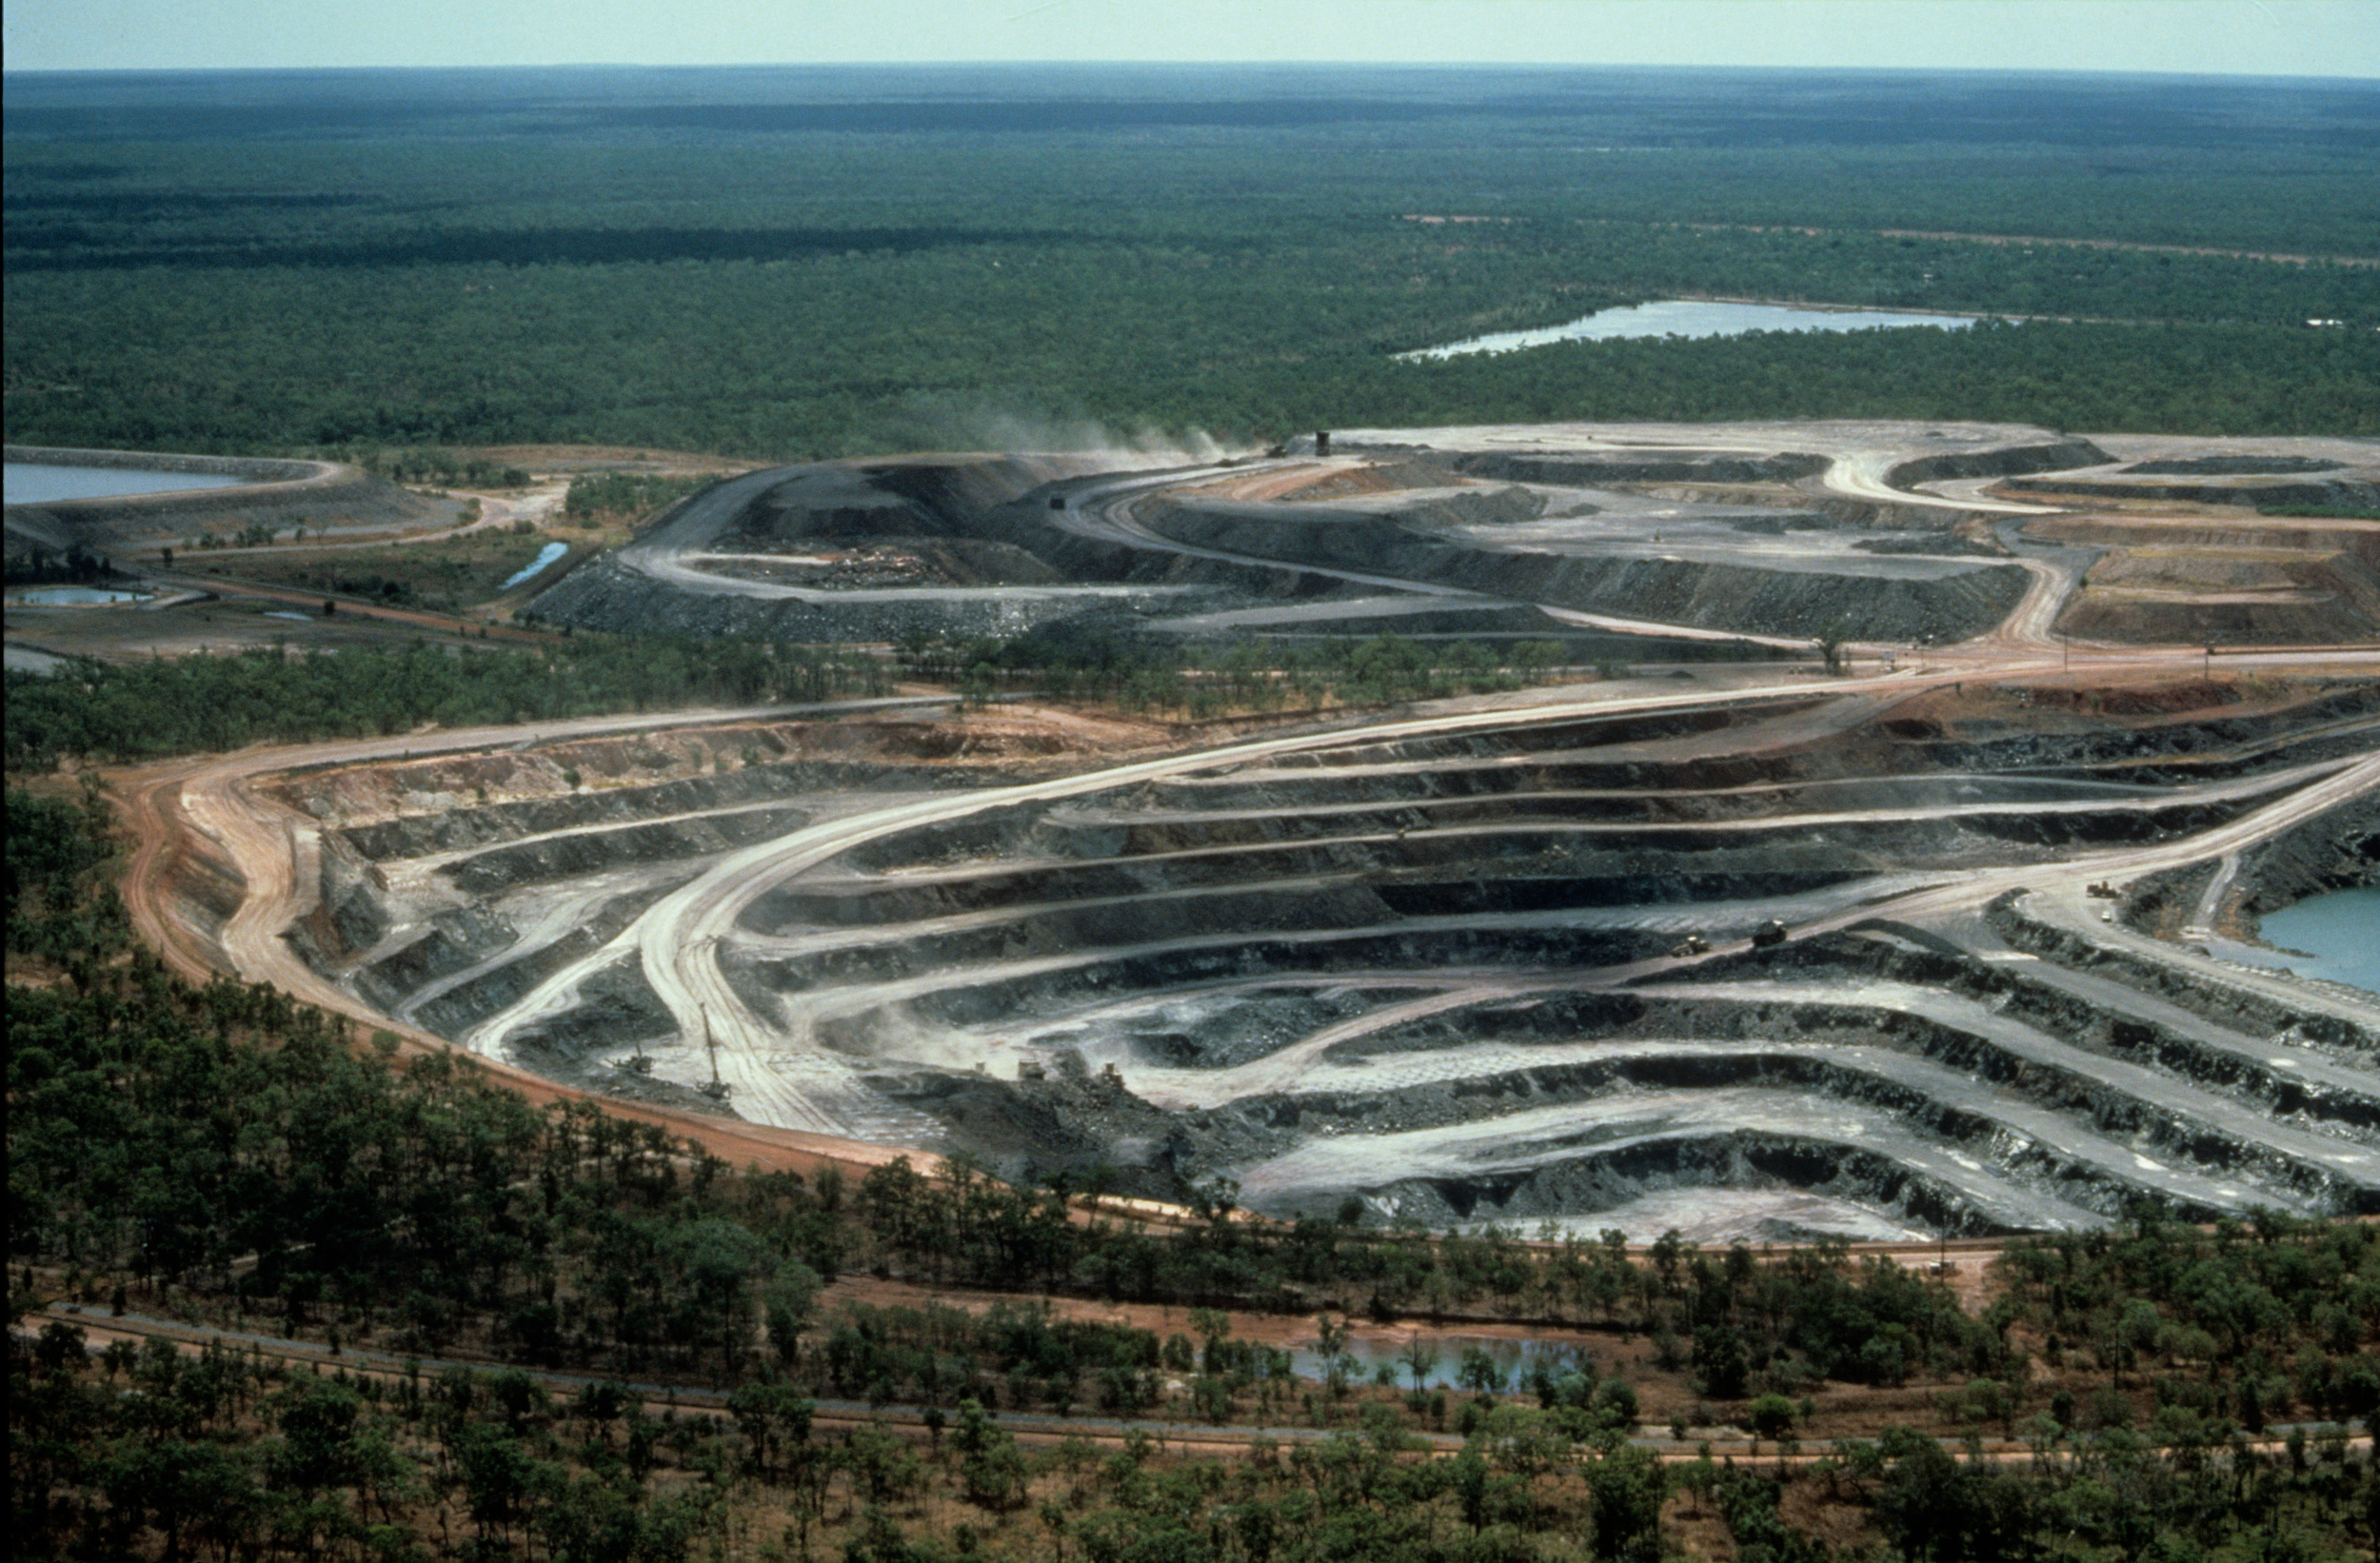 Aerial view of an open-cast mine in the middle of a forest. A huge, wide hole has been cut into the earth, sloping down in a series of flat terraces.